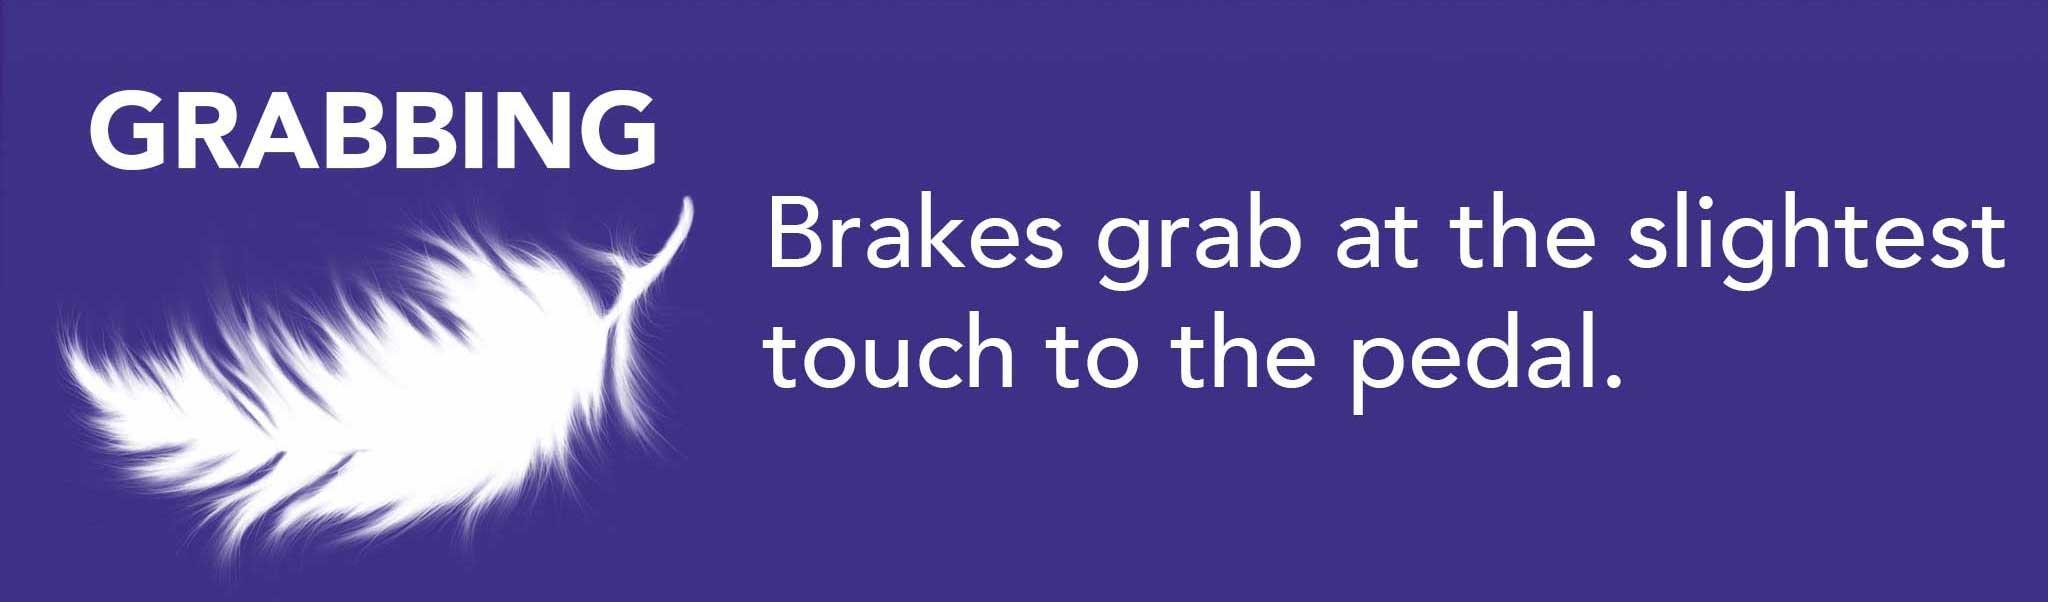 Brakes grab at the slightest touch to the pedal.